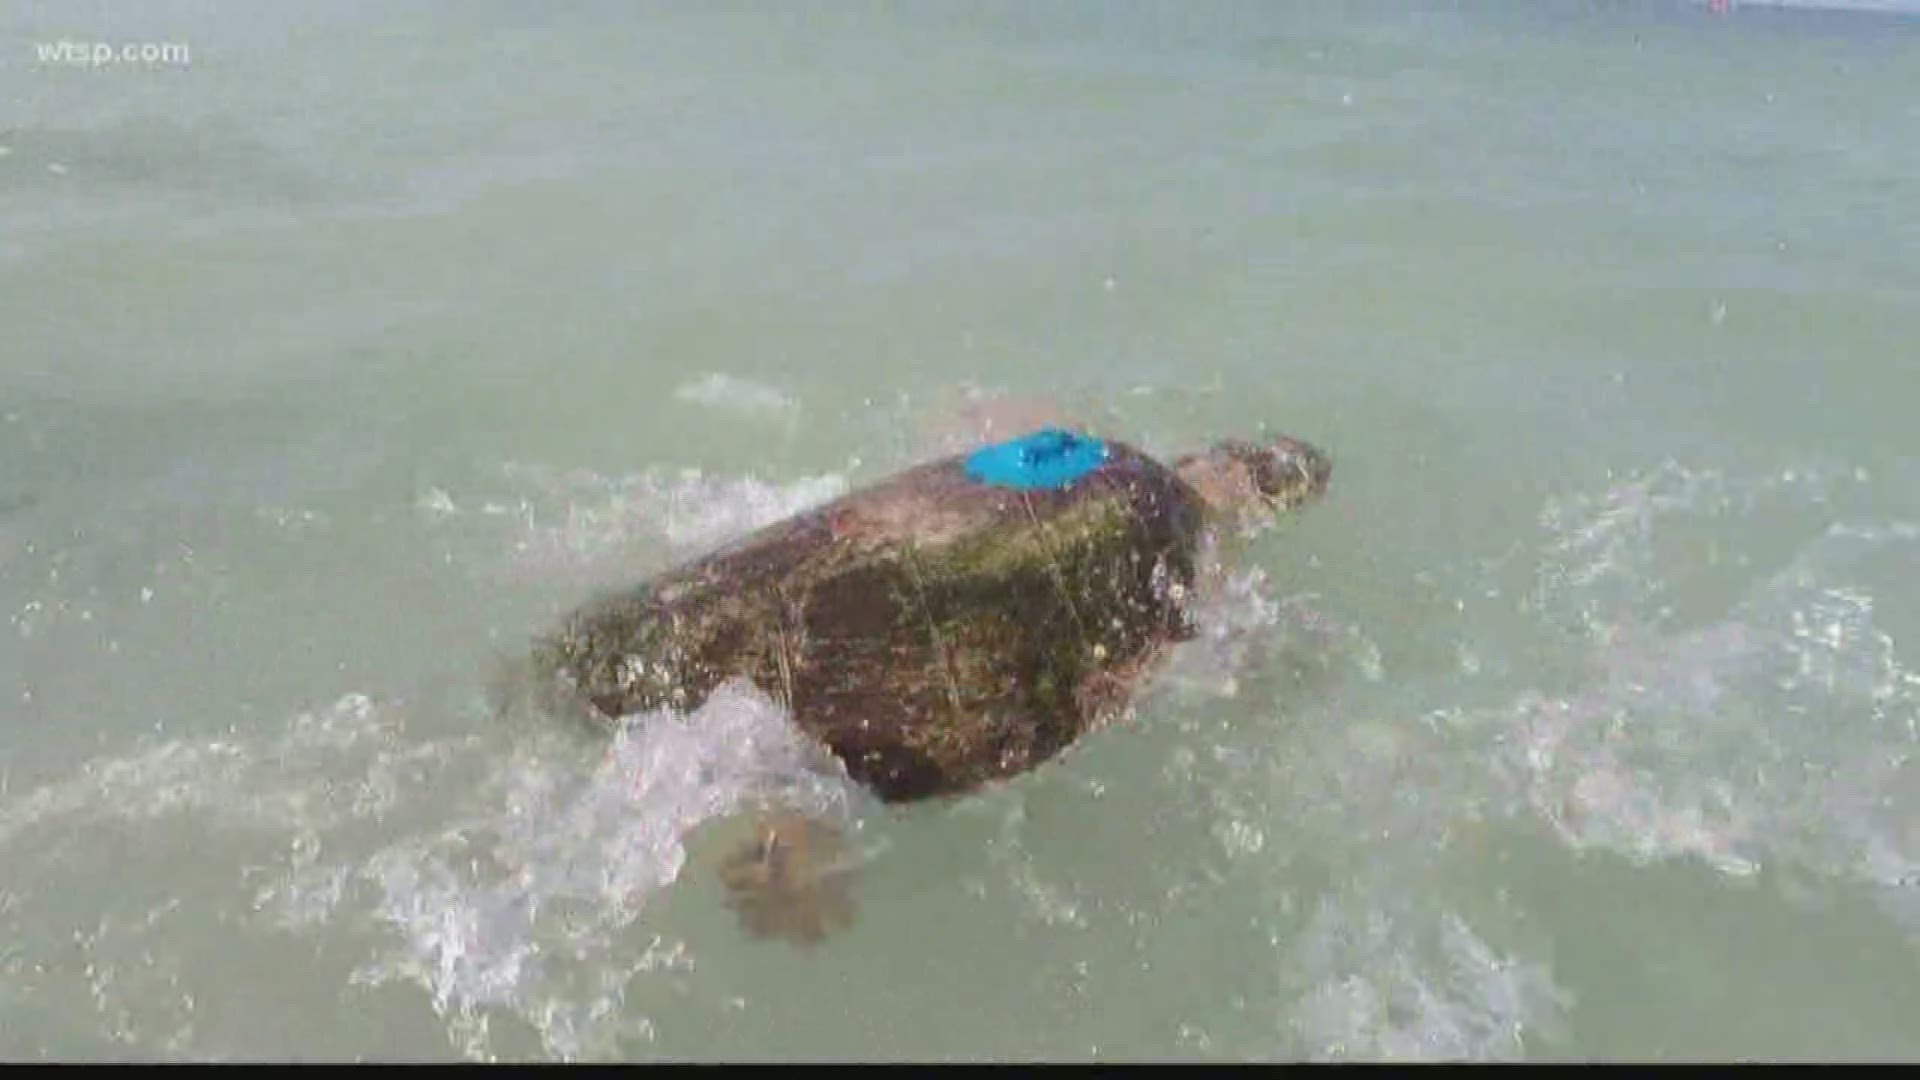 Scientists at Mote Marine Laboratories are doing their part to help save turtle nests on Longboat Key.